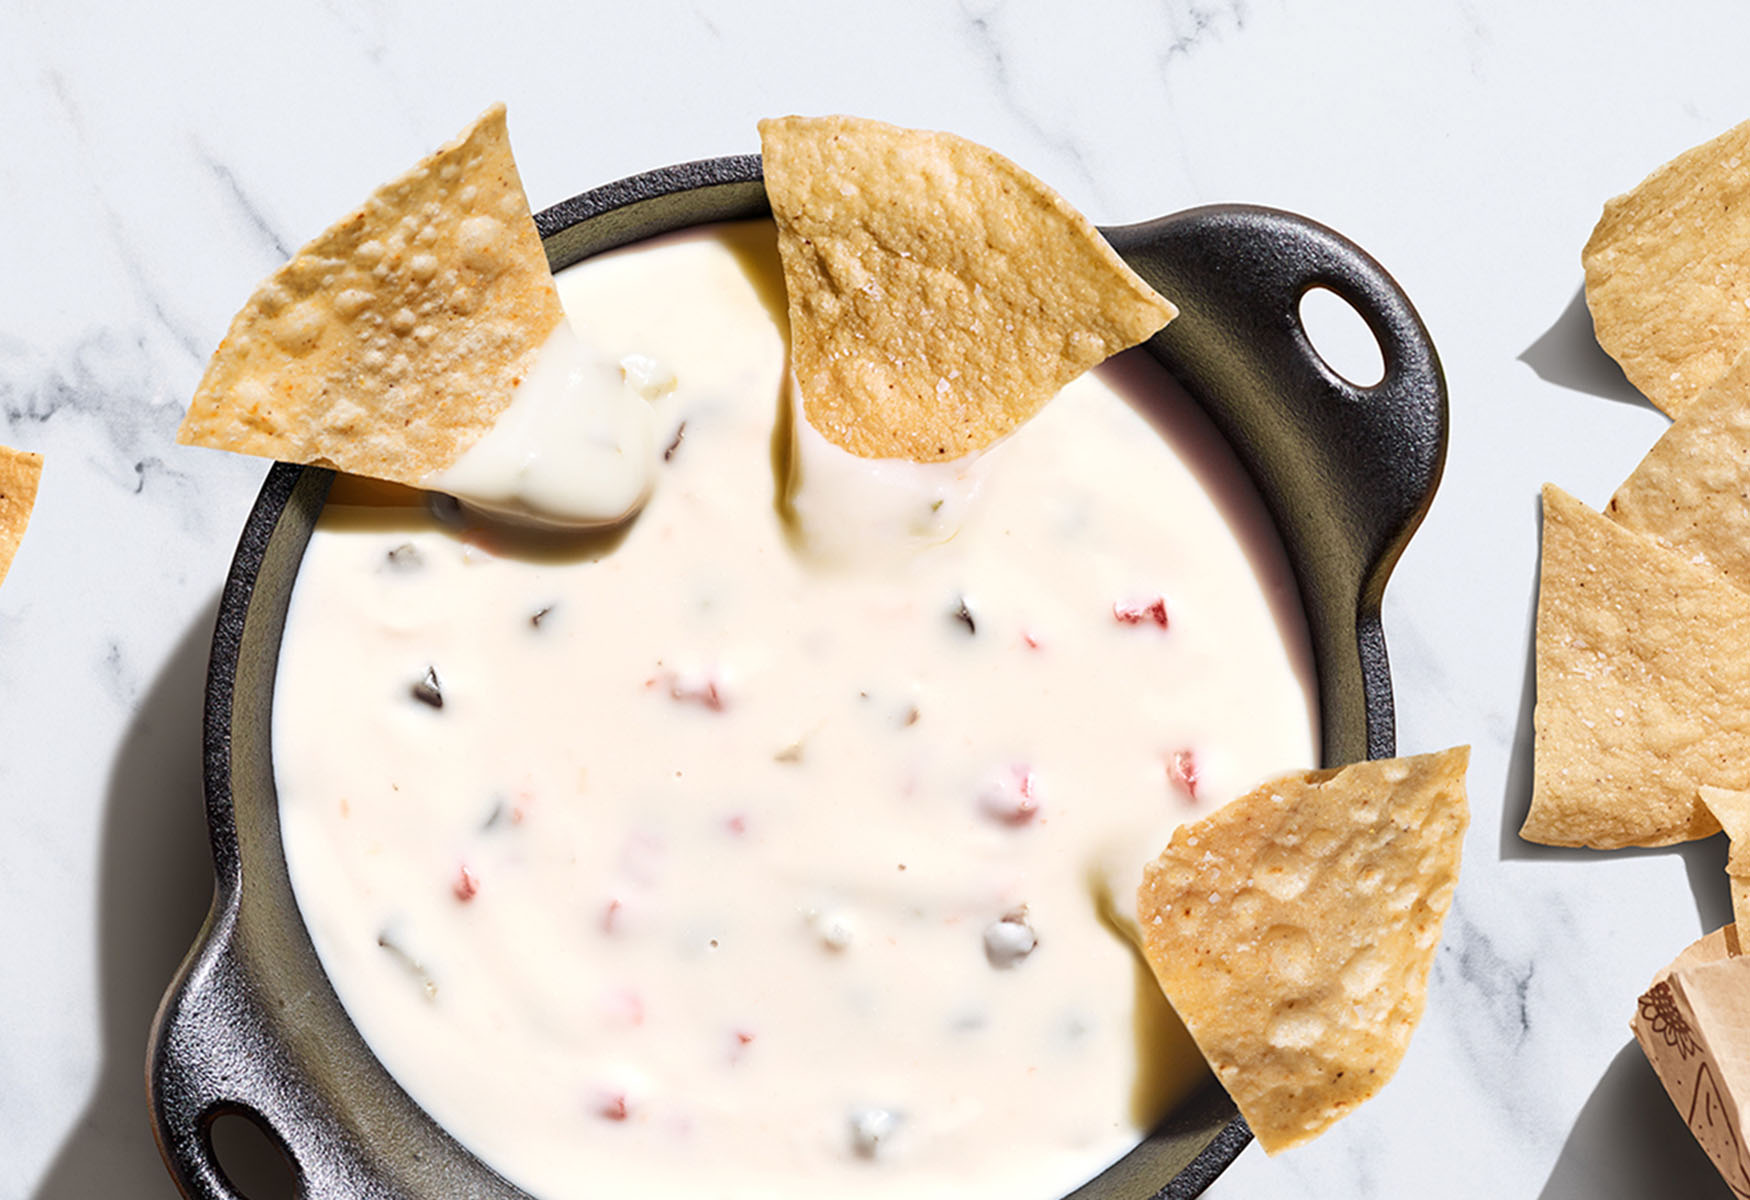 10-chipotle-queso-blanco-nutrition-facts